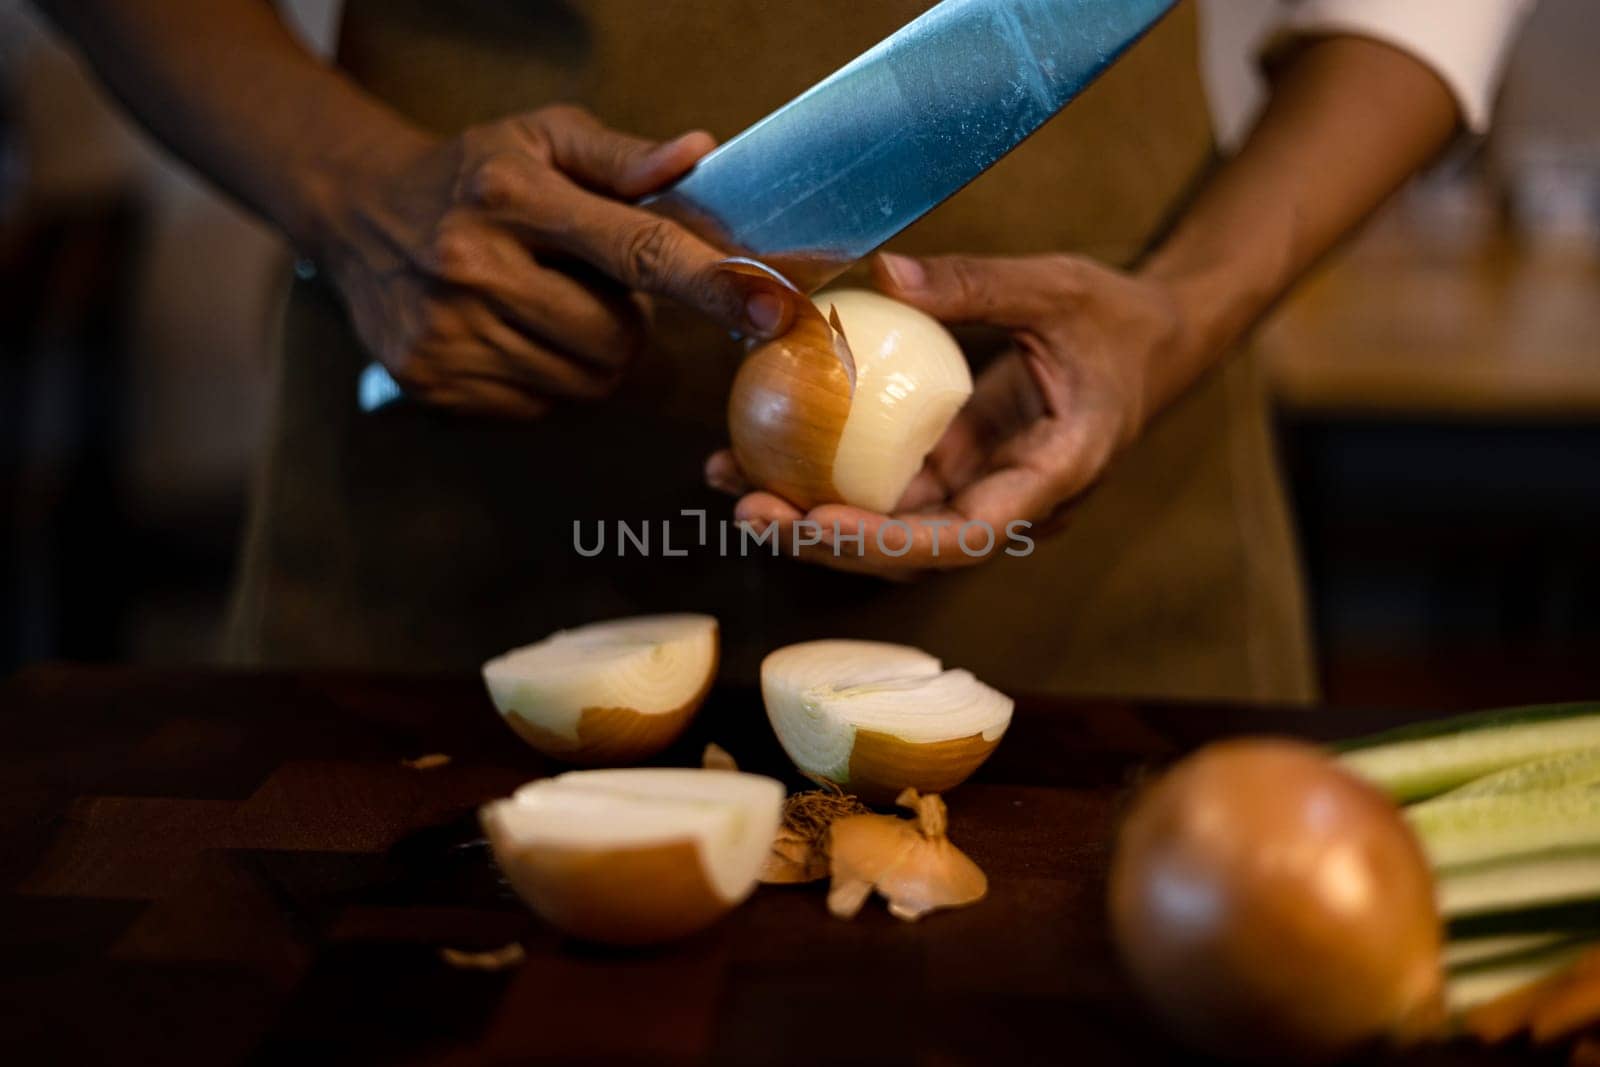 Peeling And Cutting Onions With Sharp Knife by urzine